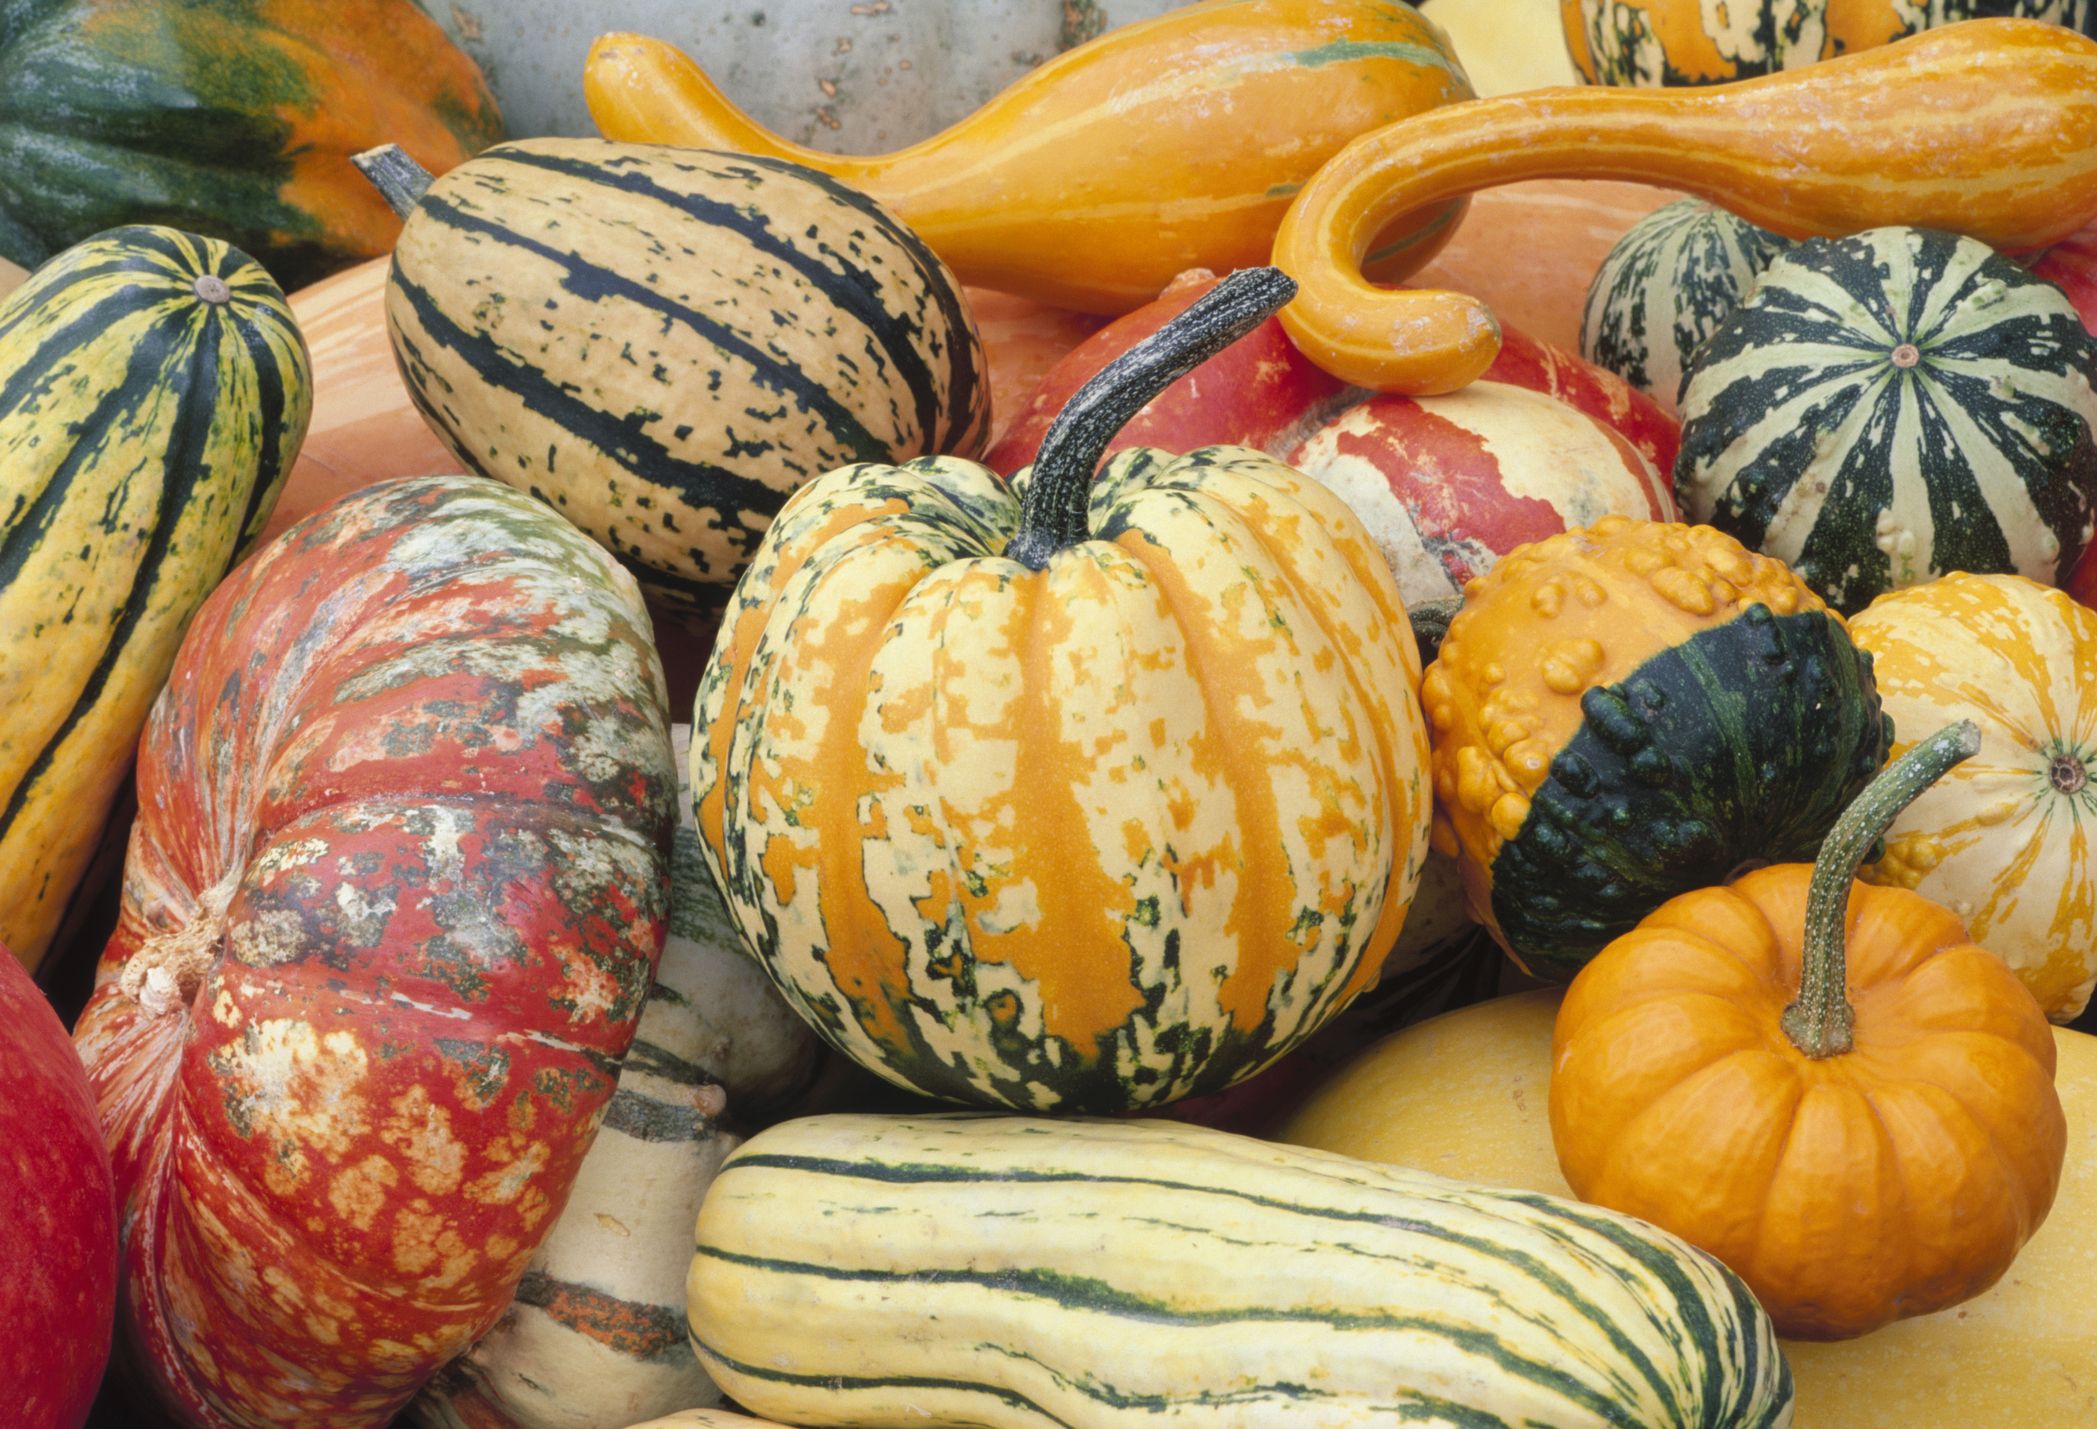 how many types of squash